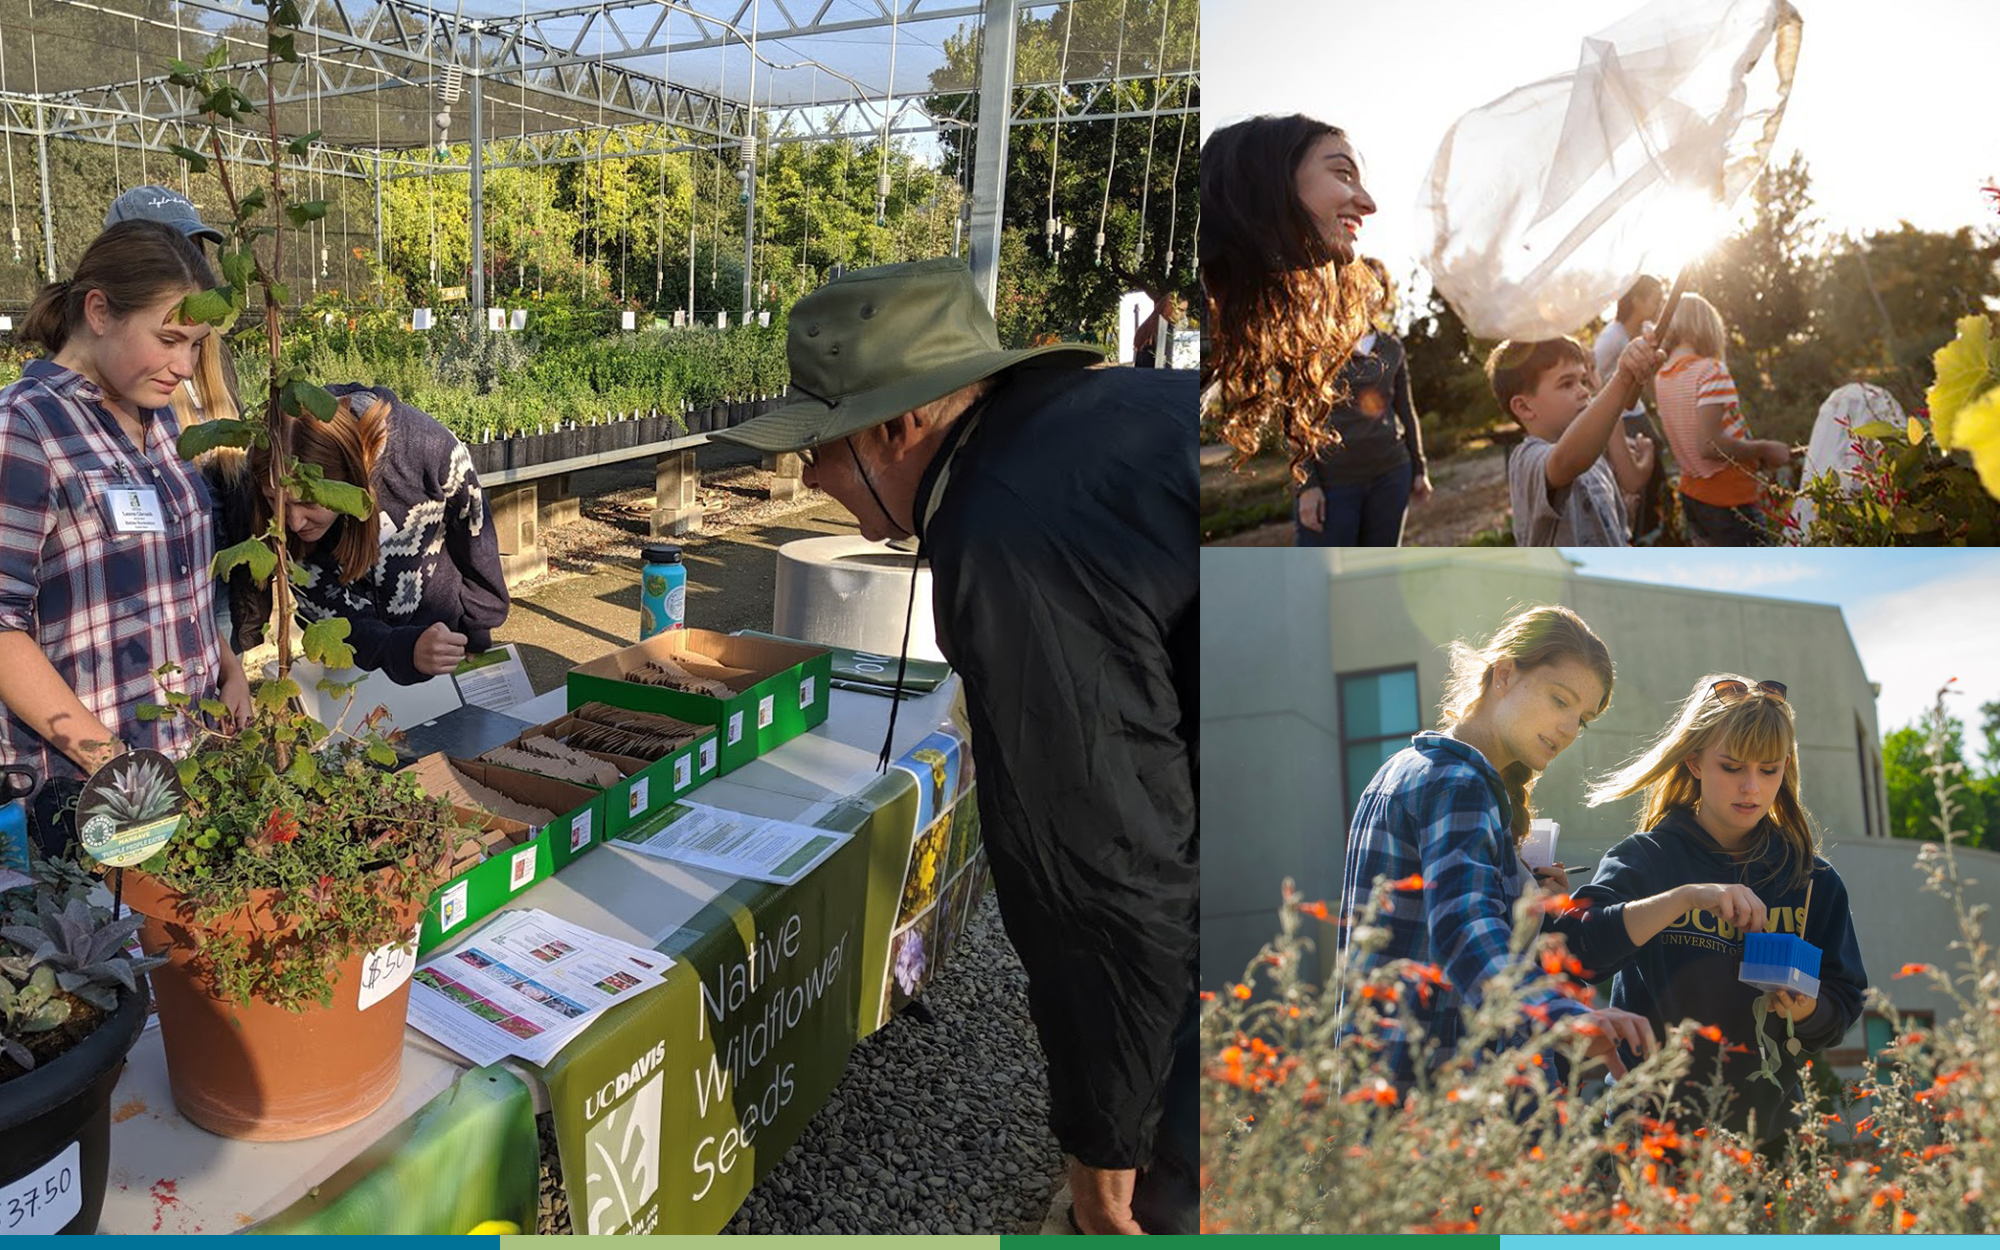 A composite of three images: on the left, a young woman in a plaid shirt watches as a man looks at plants on a table; on the right, a young woman smiles as children use butterfly nets, and two woman survey wildflowers